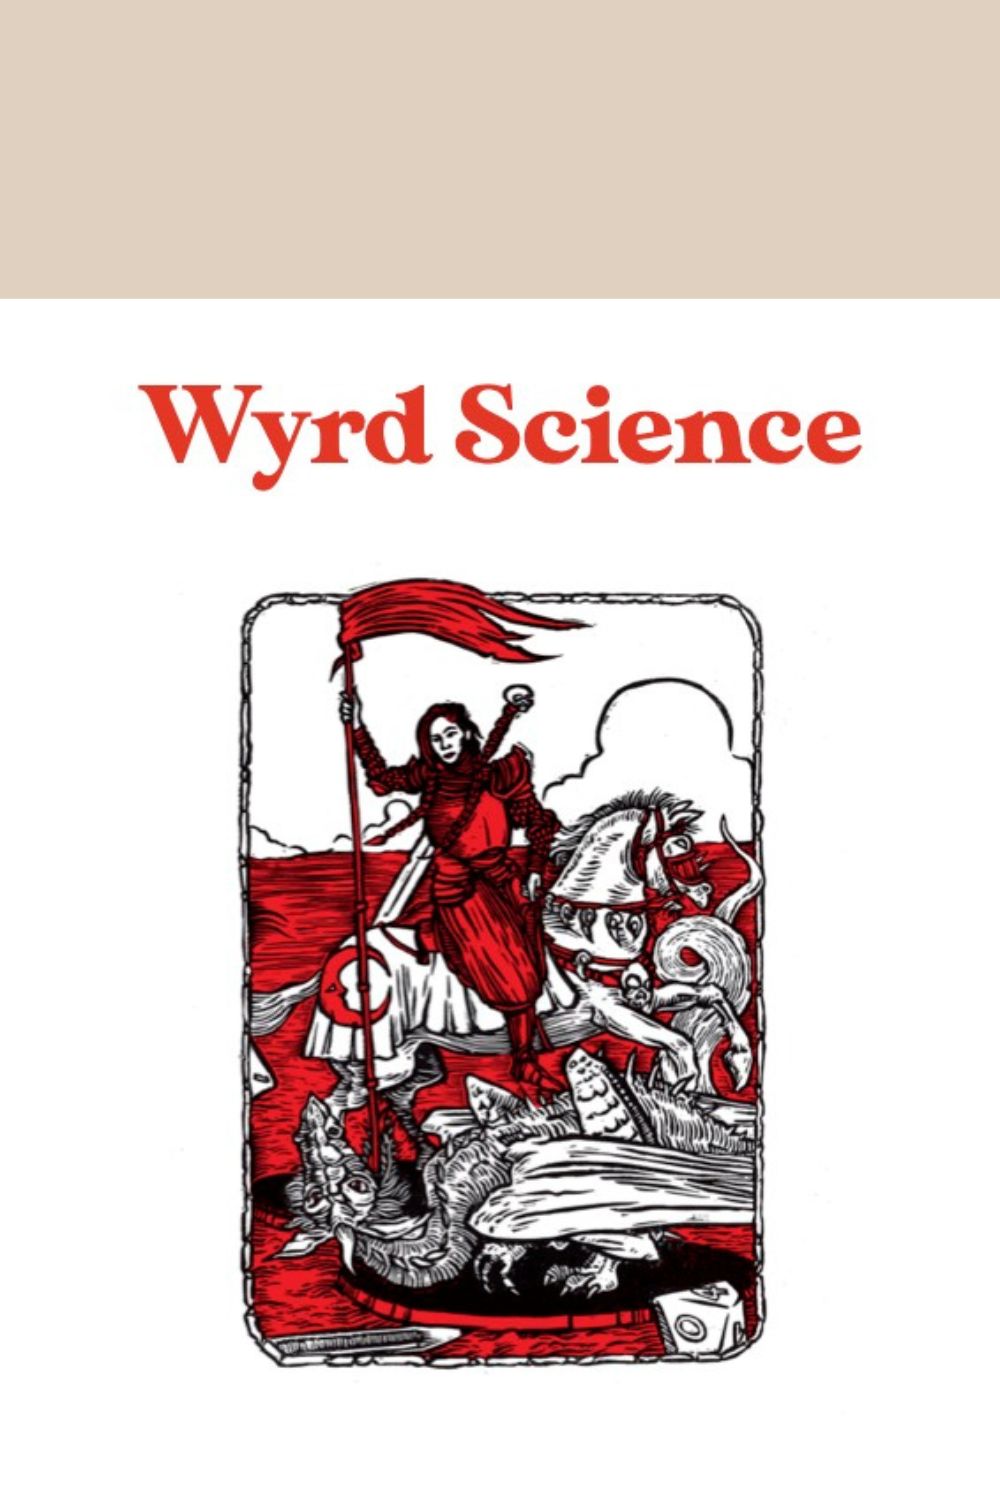 Wyrd Science Magazine Issue 4 cover